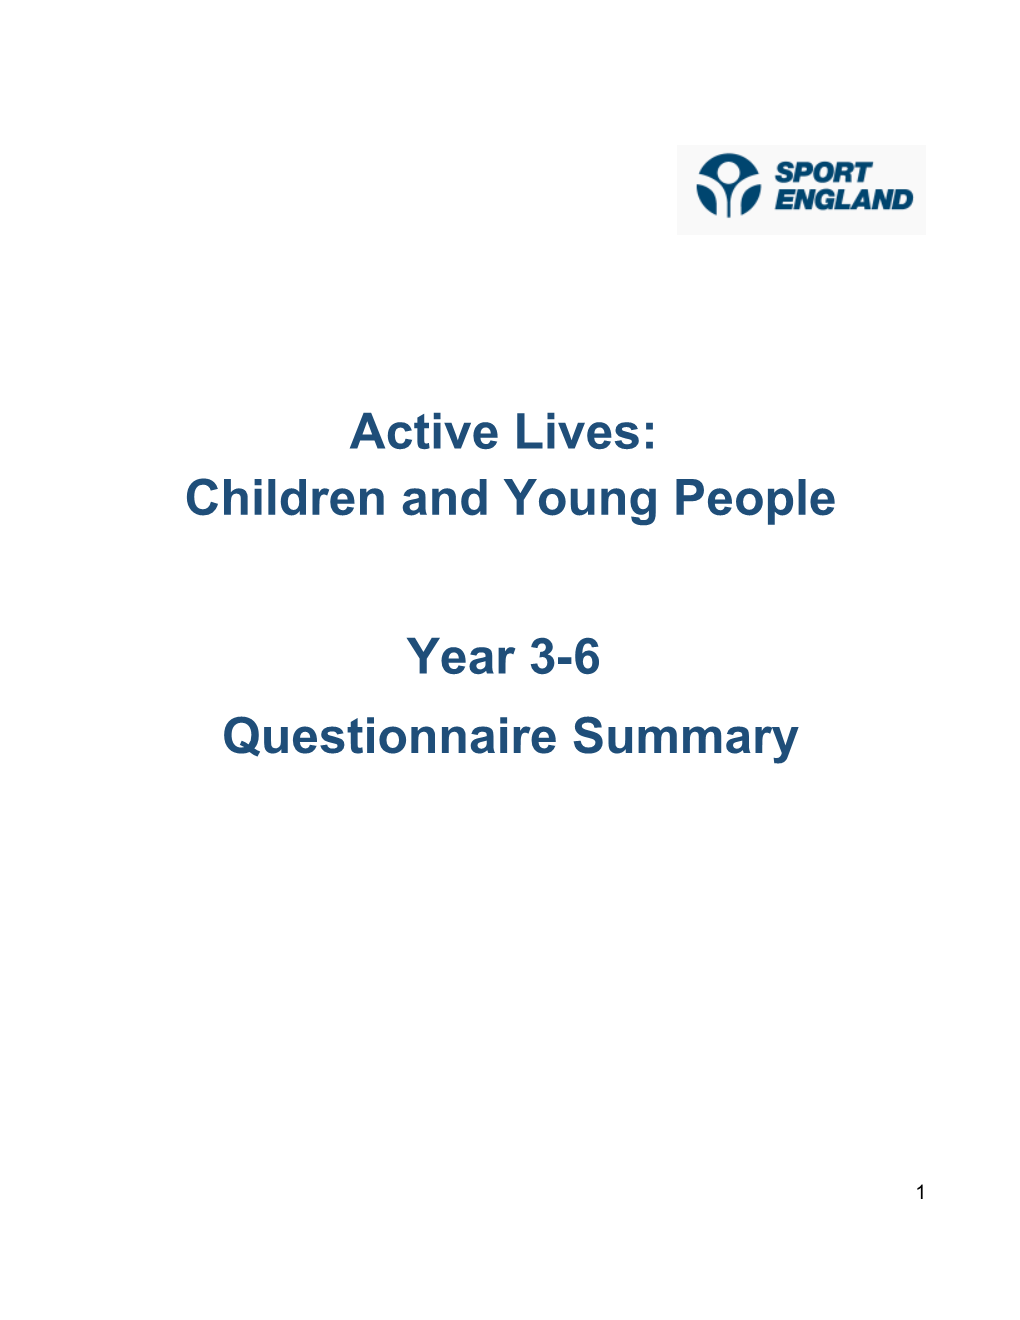 Active Lives: Children and Young People Year 3-6 Questionnaire Summary